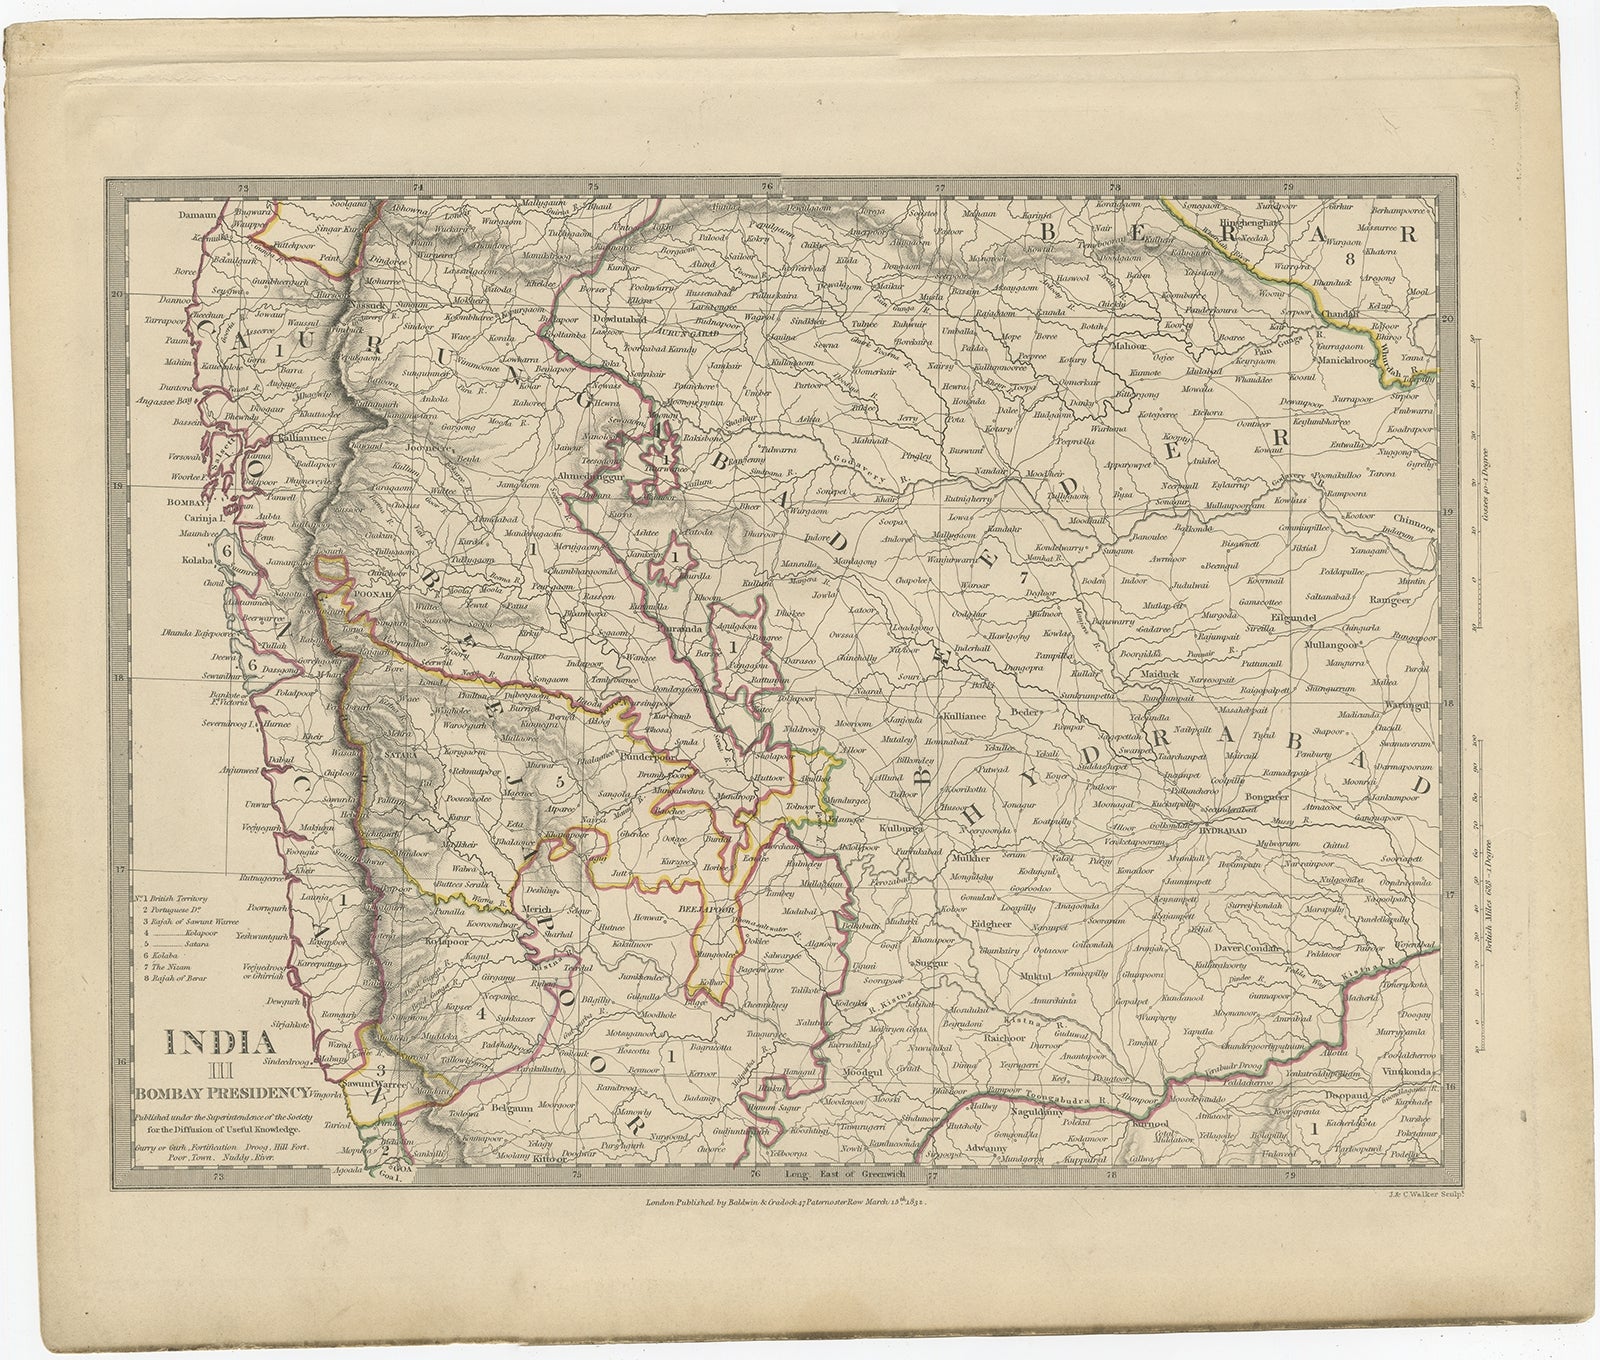 Antique map titled 'India III Bombay Presidency'. Old steel engraved map of part of the Bombay Presidency. The Bombay Presidency, also known as Bombay and Sind from 1843 to 1936 and the Bombay Province, was an administrative subdivision (presidency)